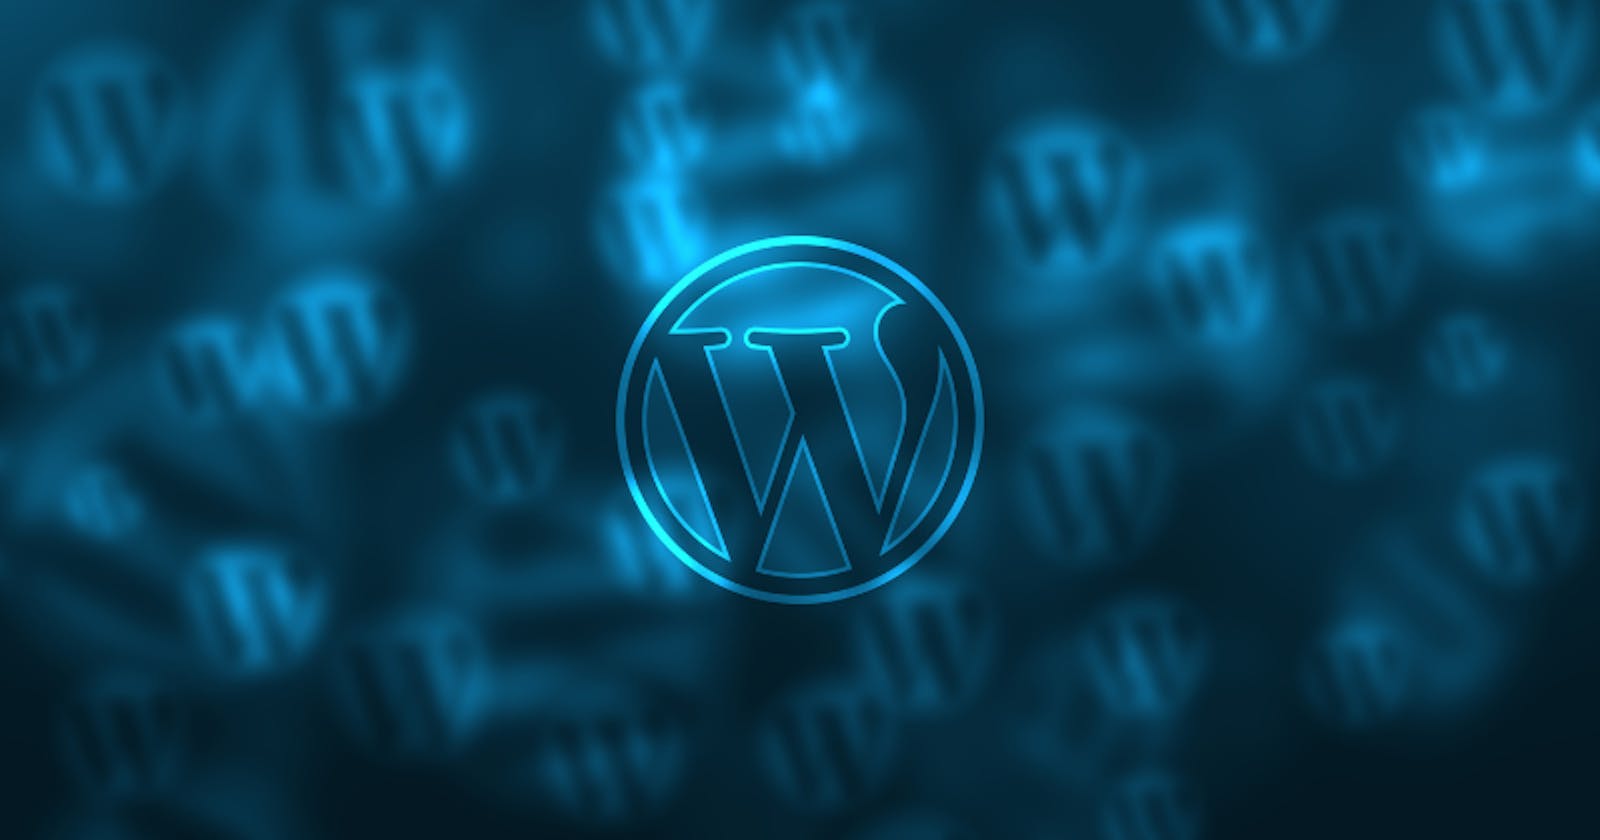 How To Add A Privacy Policy To WordPress